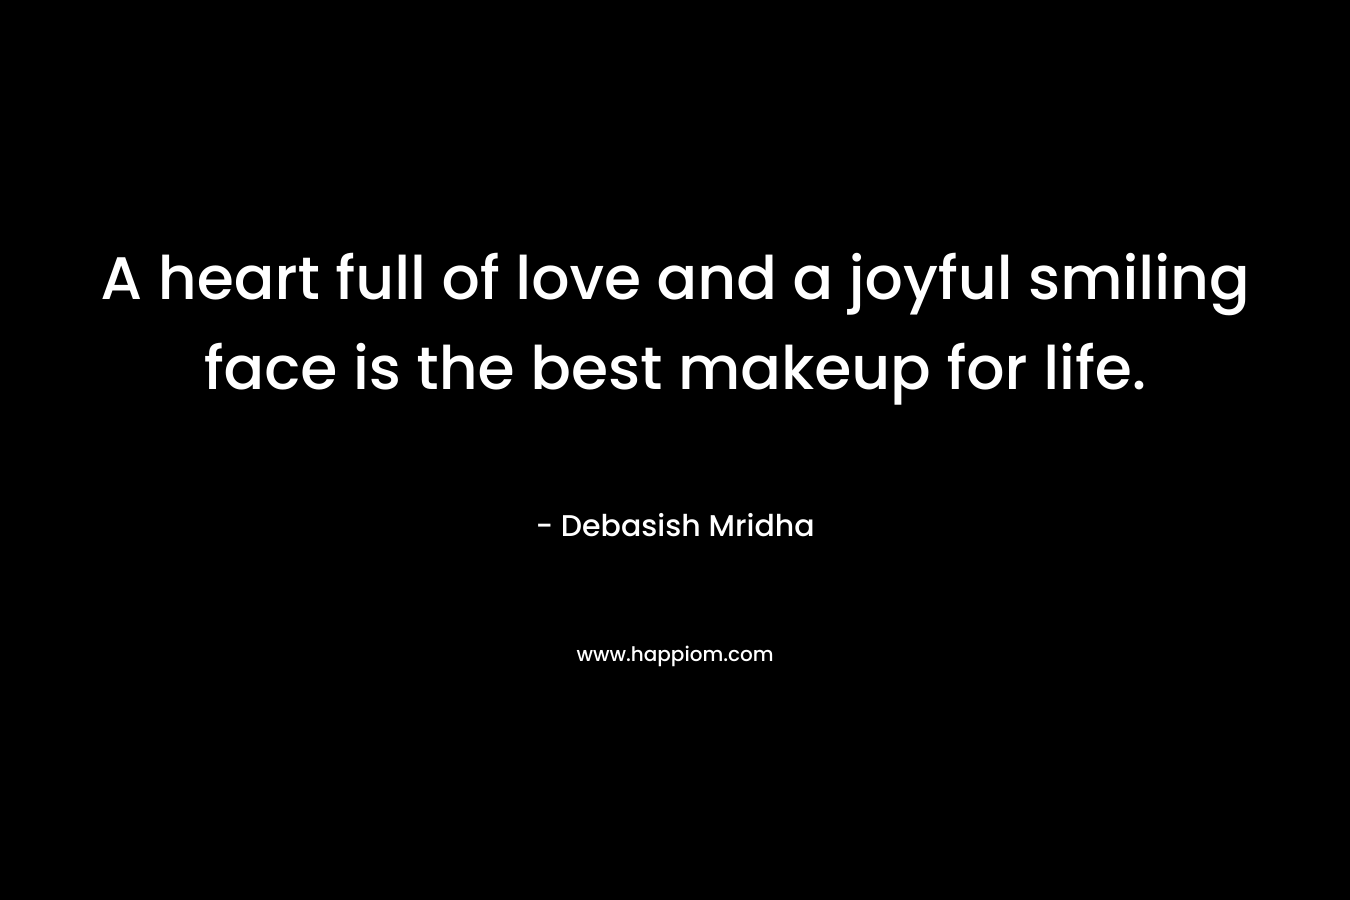 A heart full of love and a joyful smiling face is the best makeup for life.